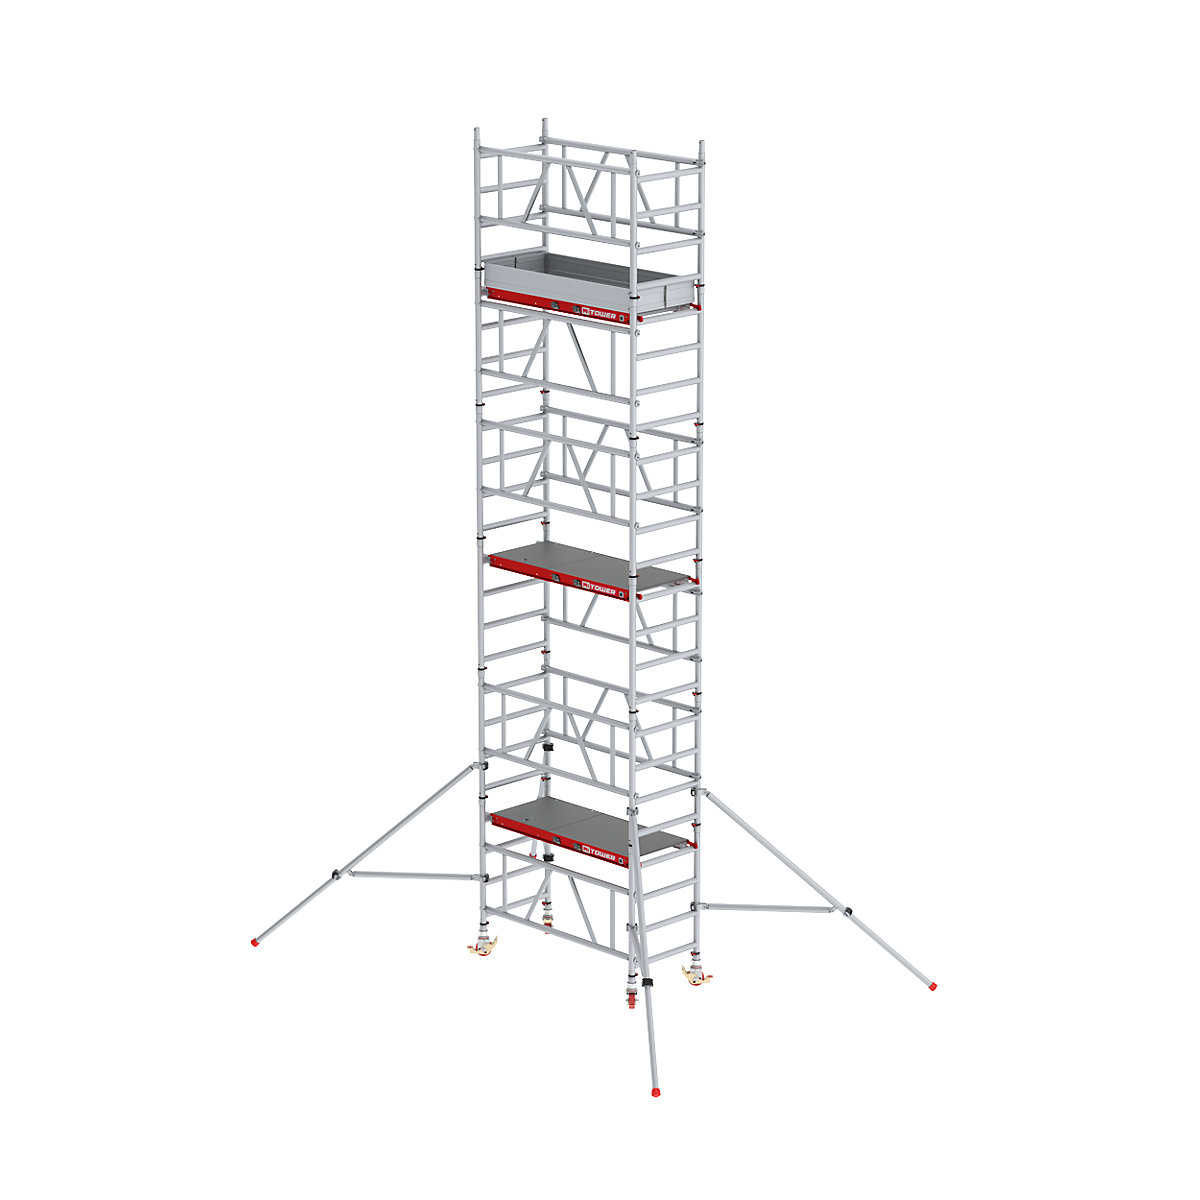 MiTOWER Plus quick assembly mobile access tower – Altrex, Fiber-Deck® platform, working height 7 m-4